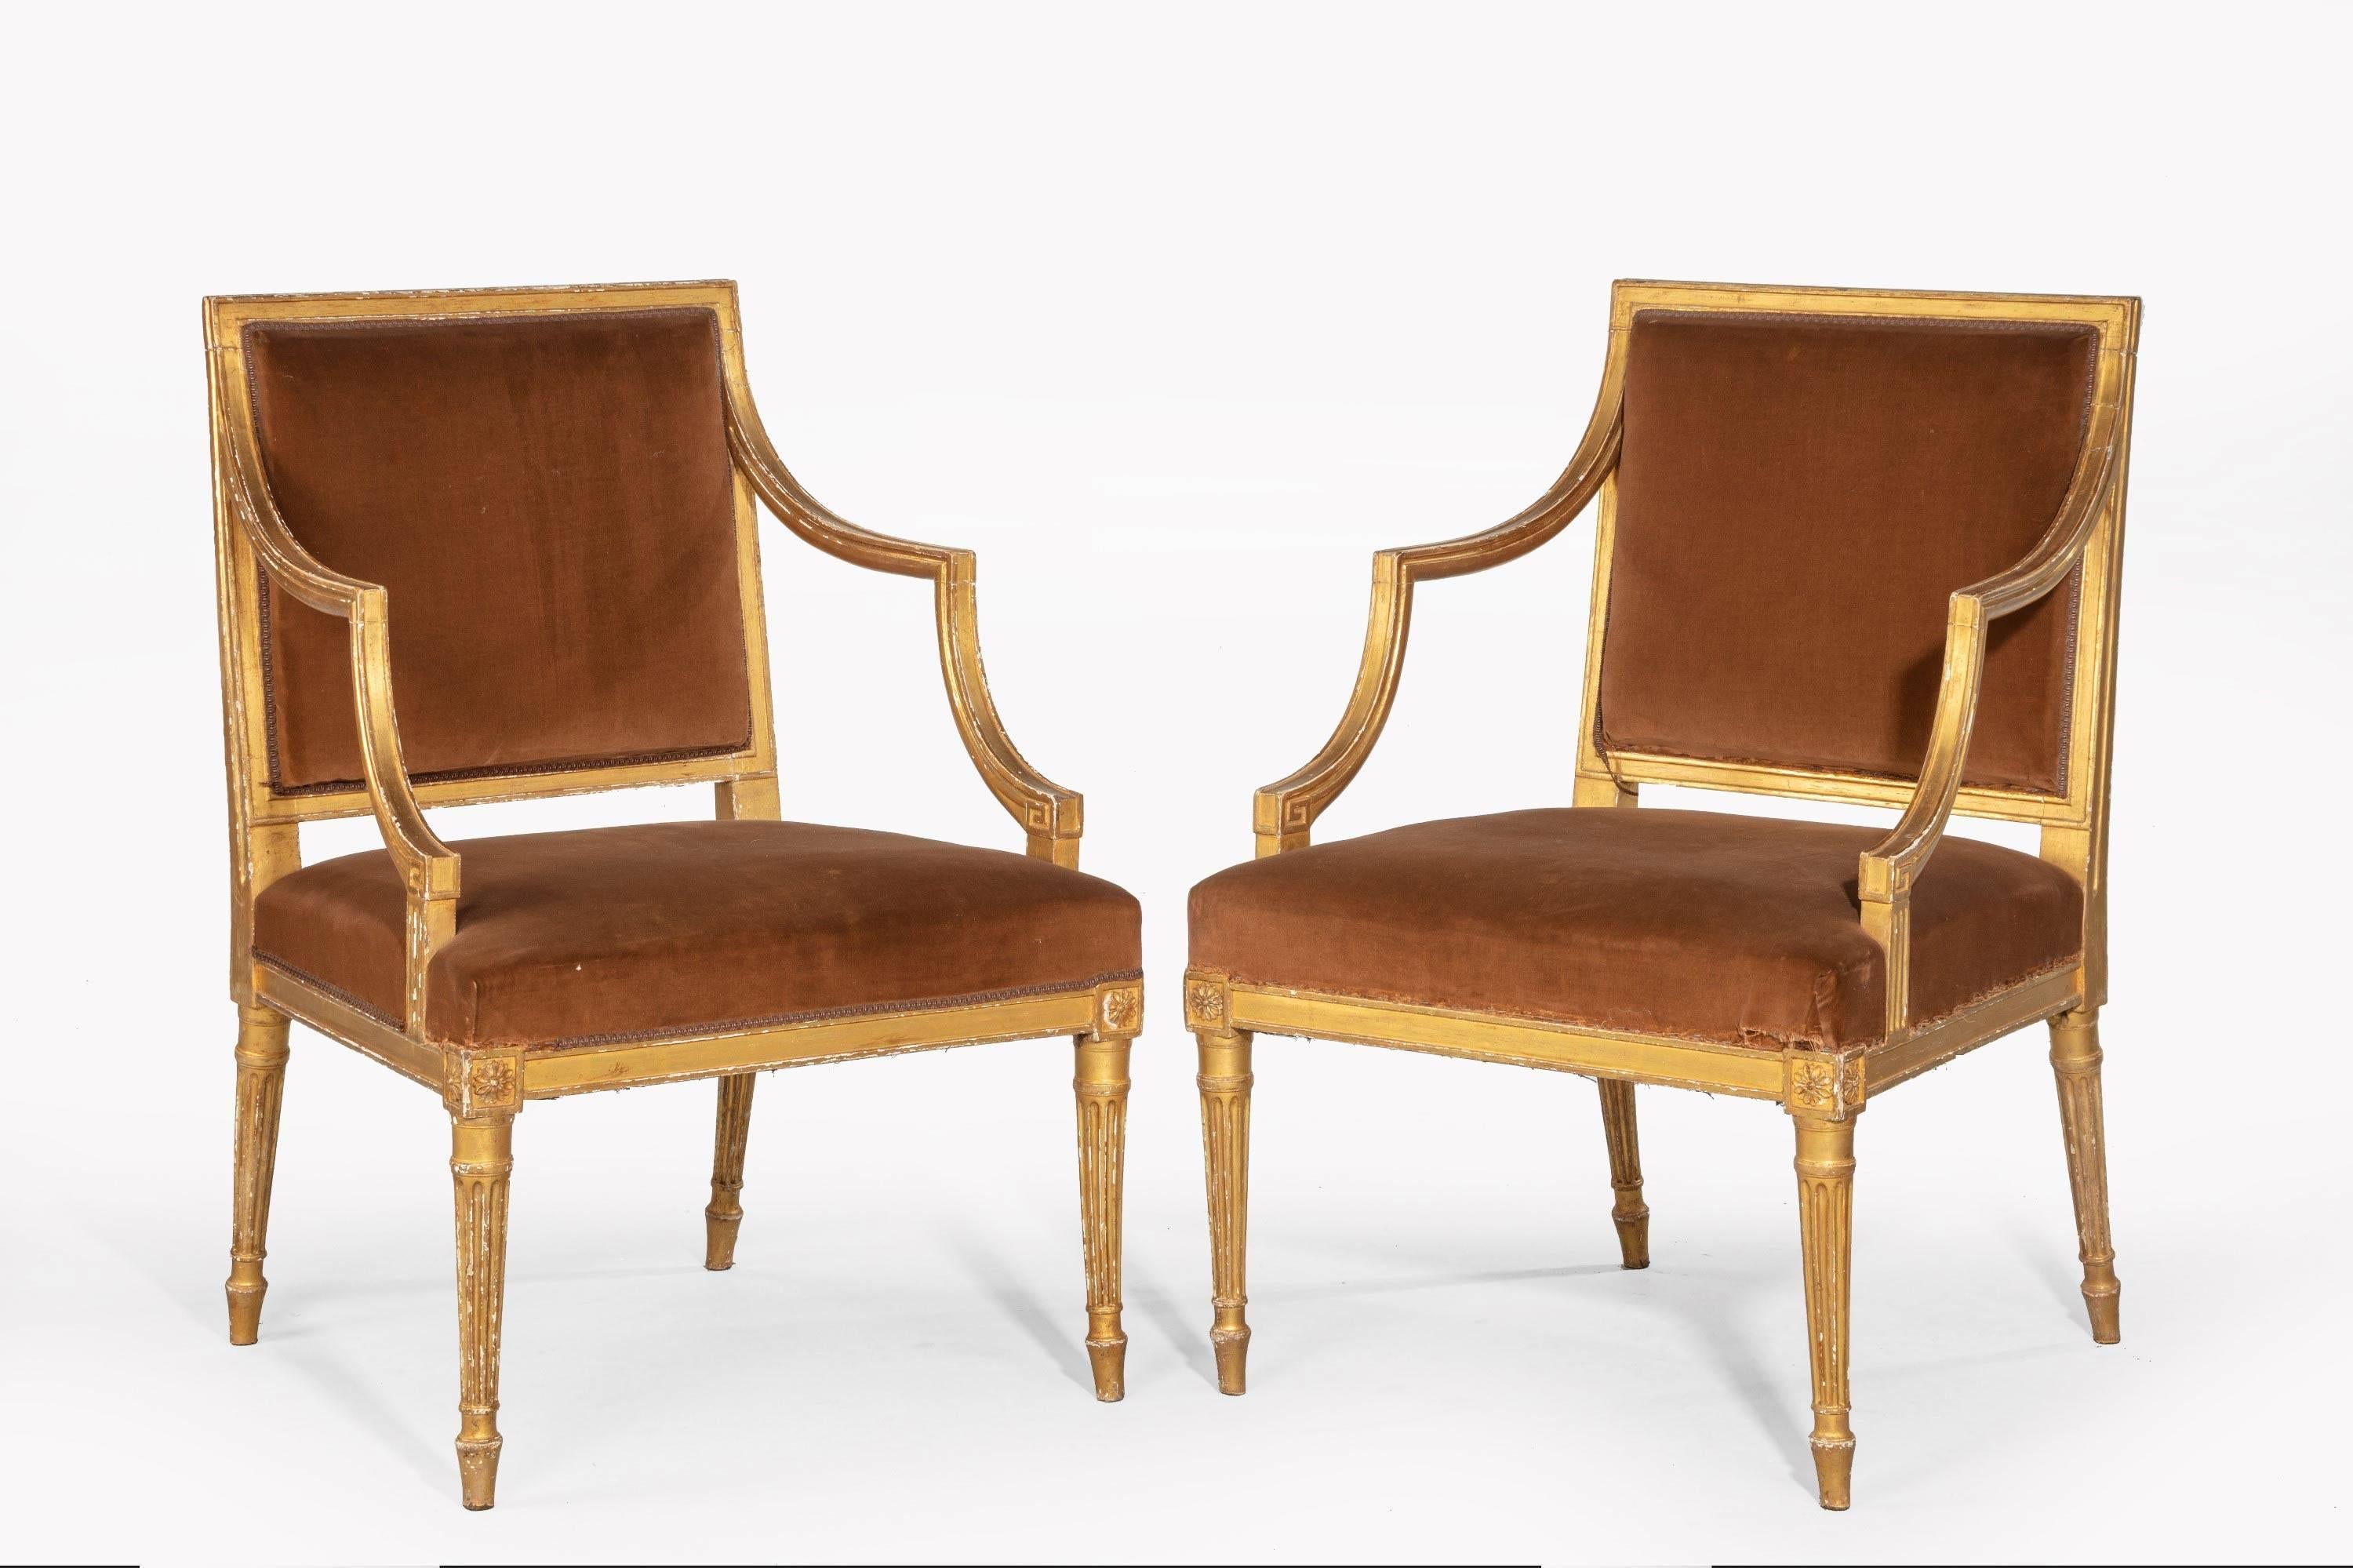 Pair of Chippendale Period Giltwood Elbow Chairs In Good Condition In Peterborough, Northamptonshire